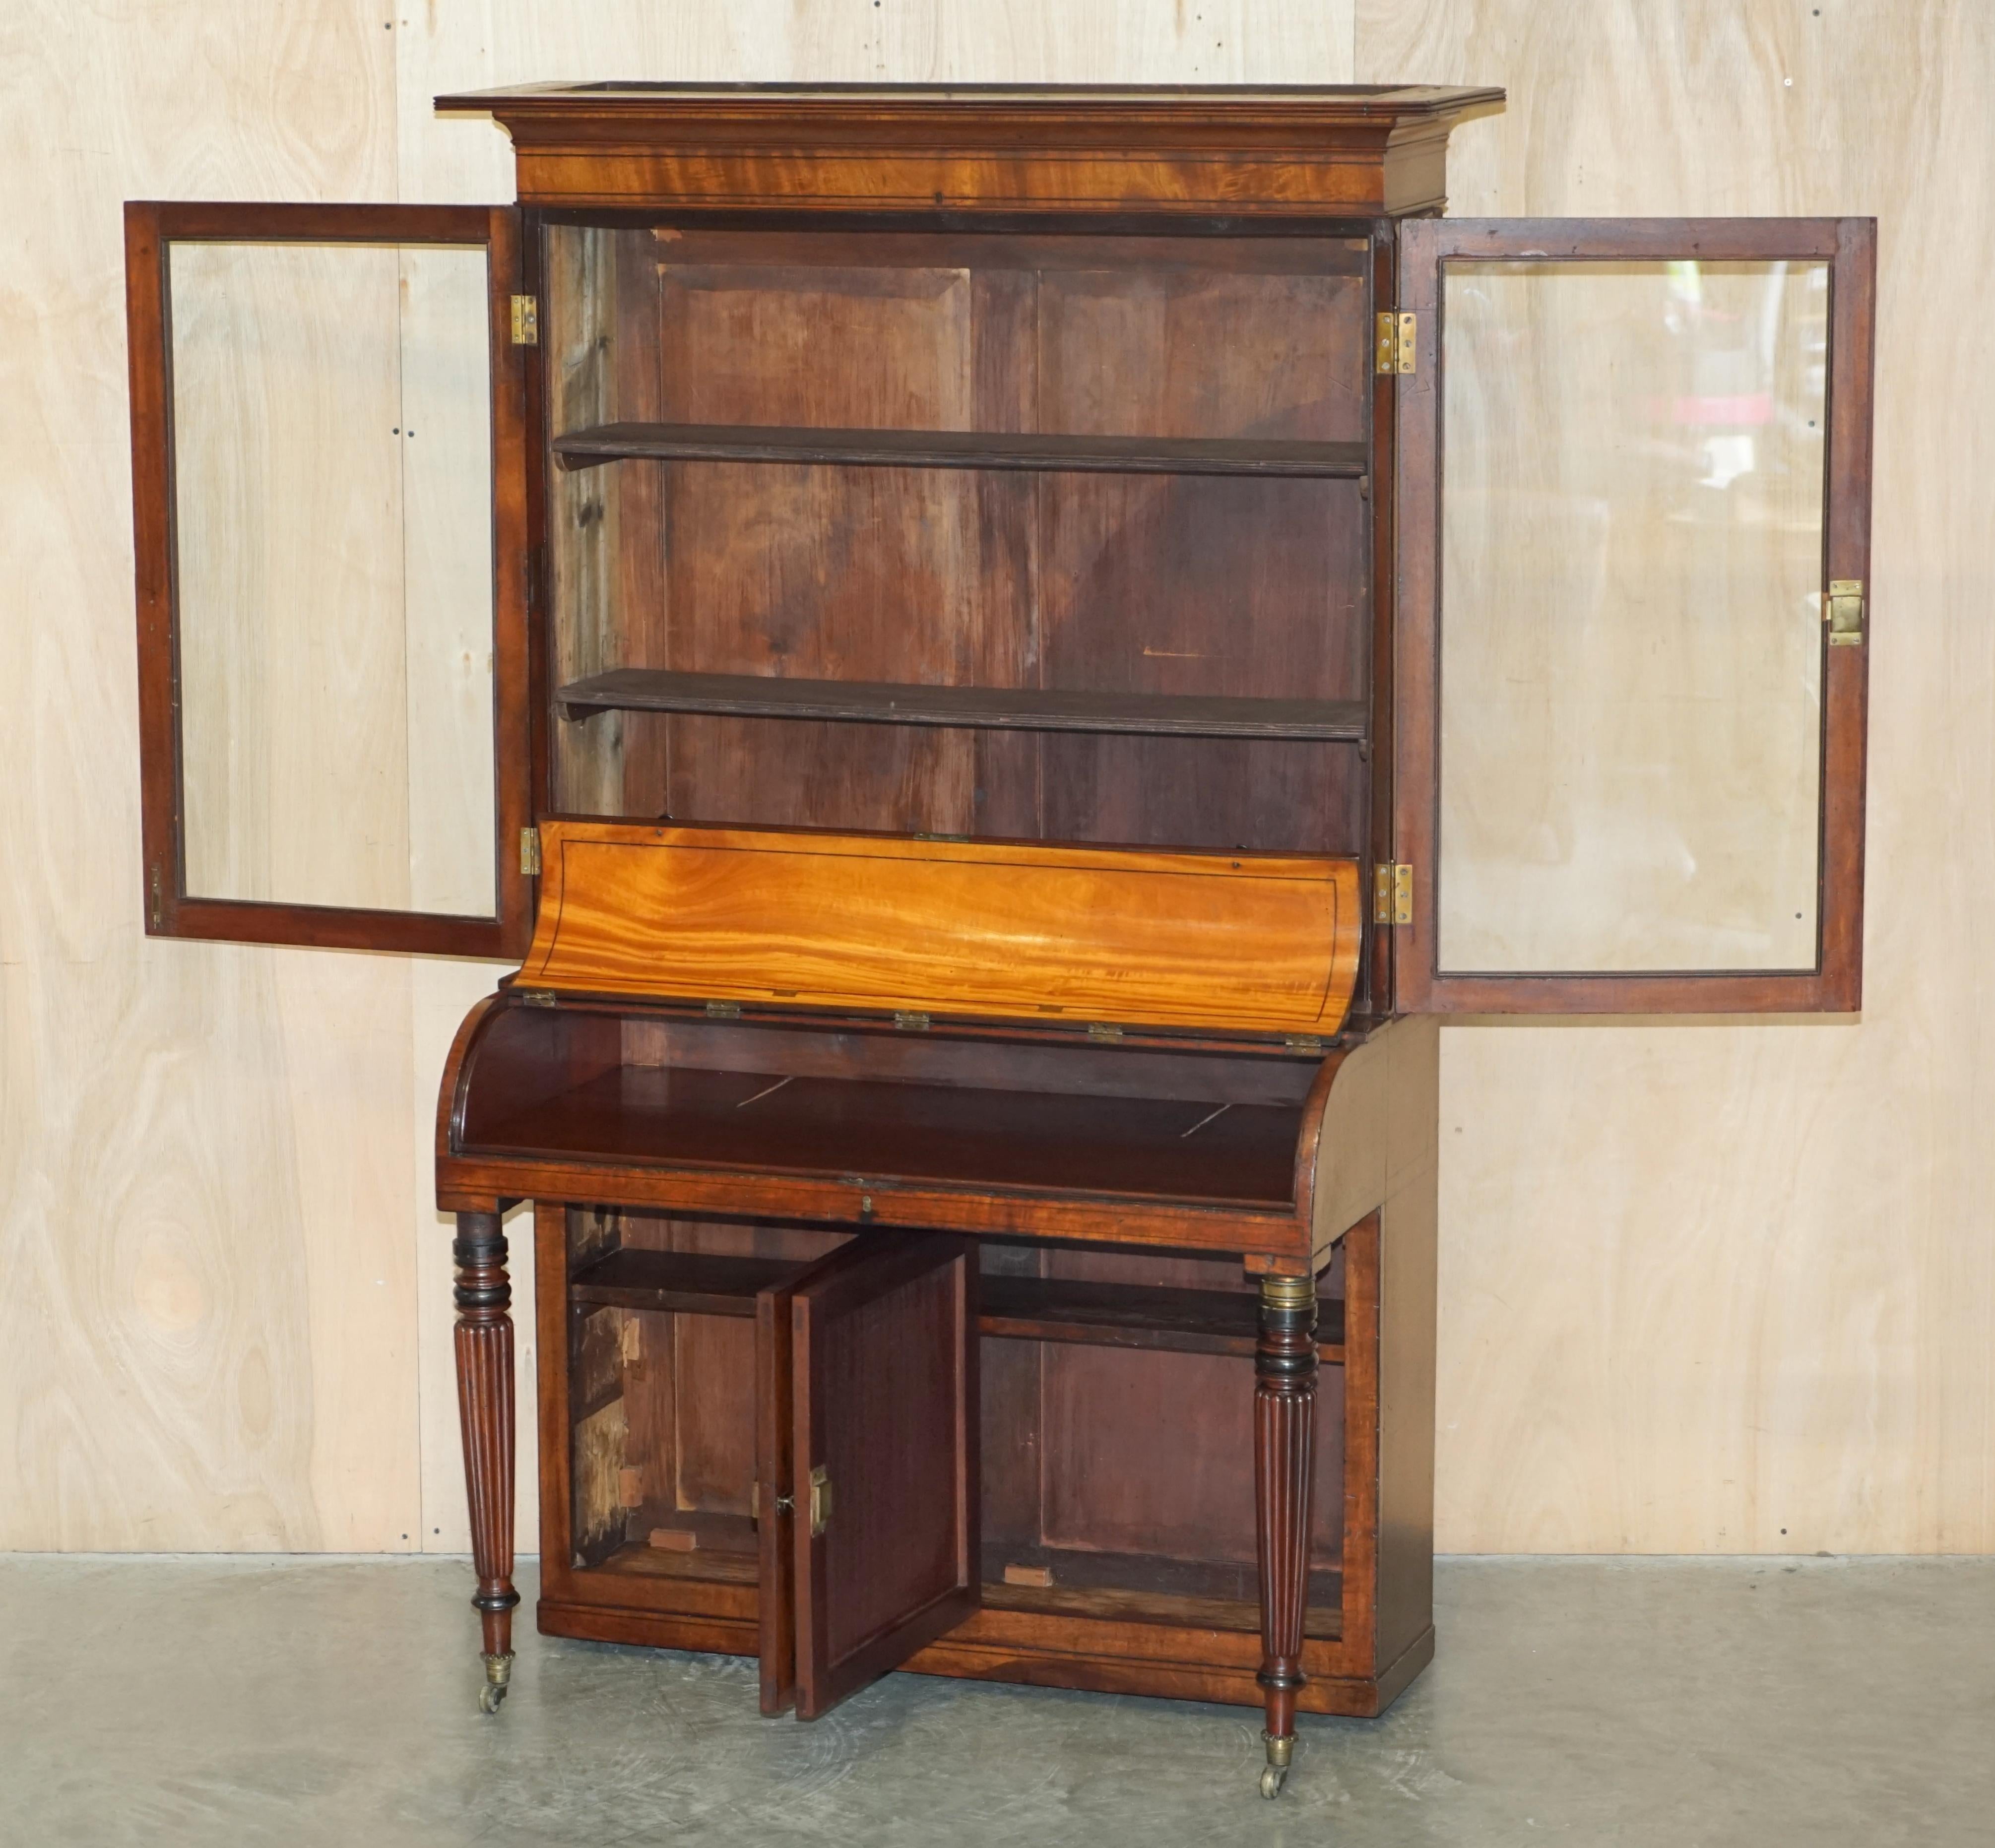 ANTIQUE ViCTORIAN 1860 WALNUT SCRIBAN BUREAU BOOKCASE MUST SEE PICTURES For Sale 10